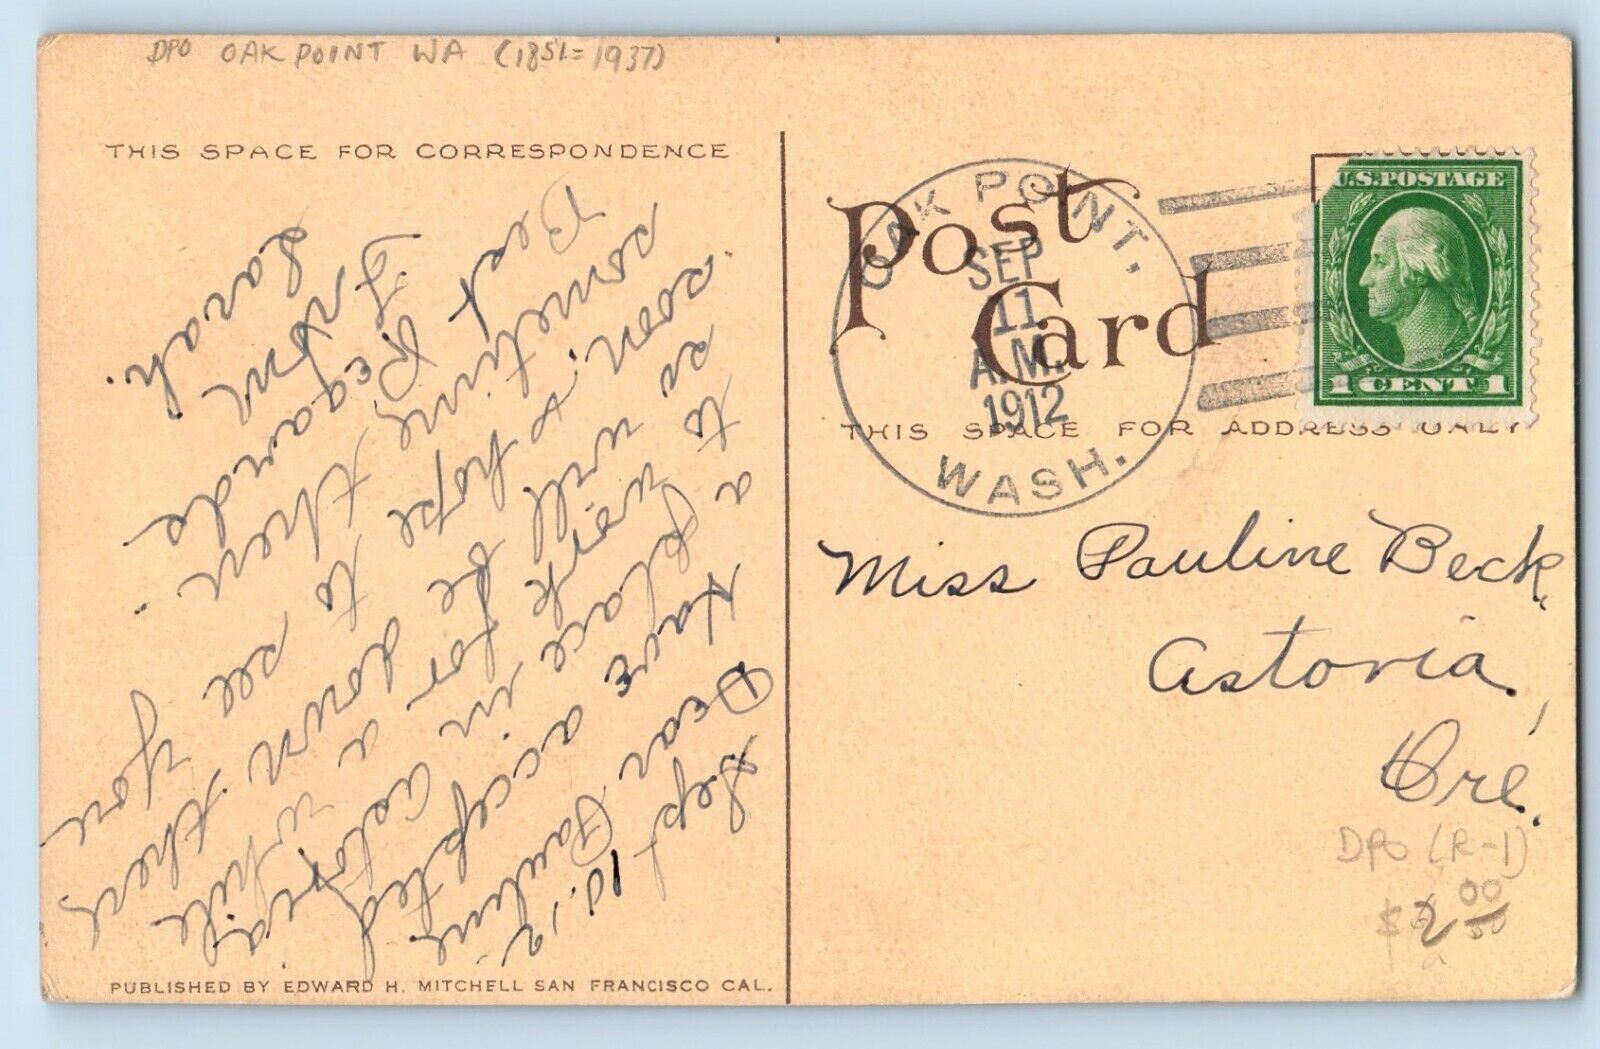 DPO (1851-1937) Oak Point WA Postcard Rooster Rock Boating Columbia River OR